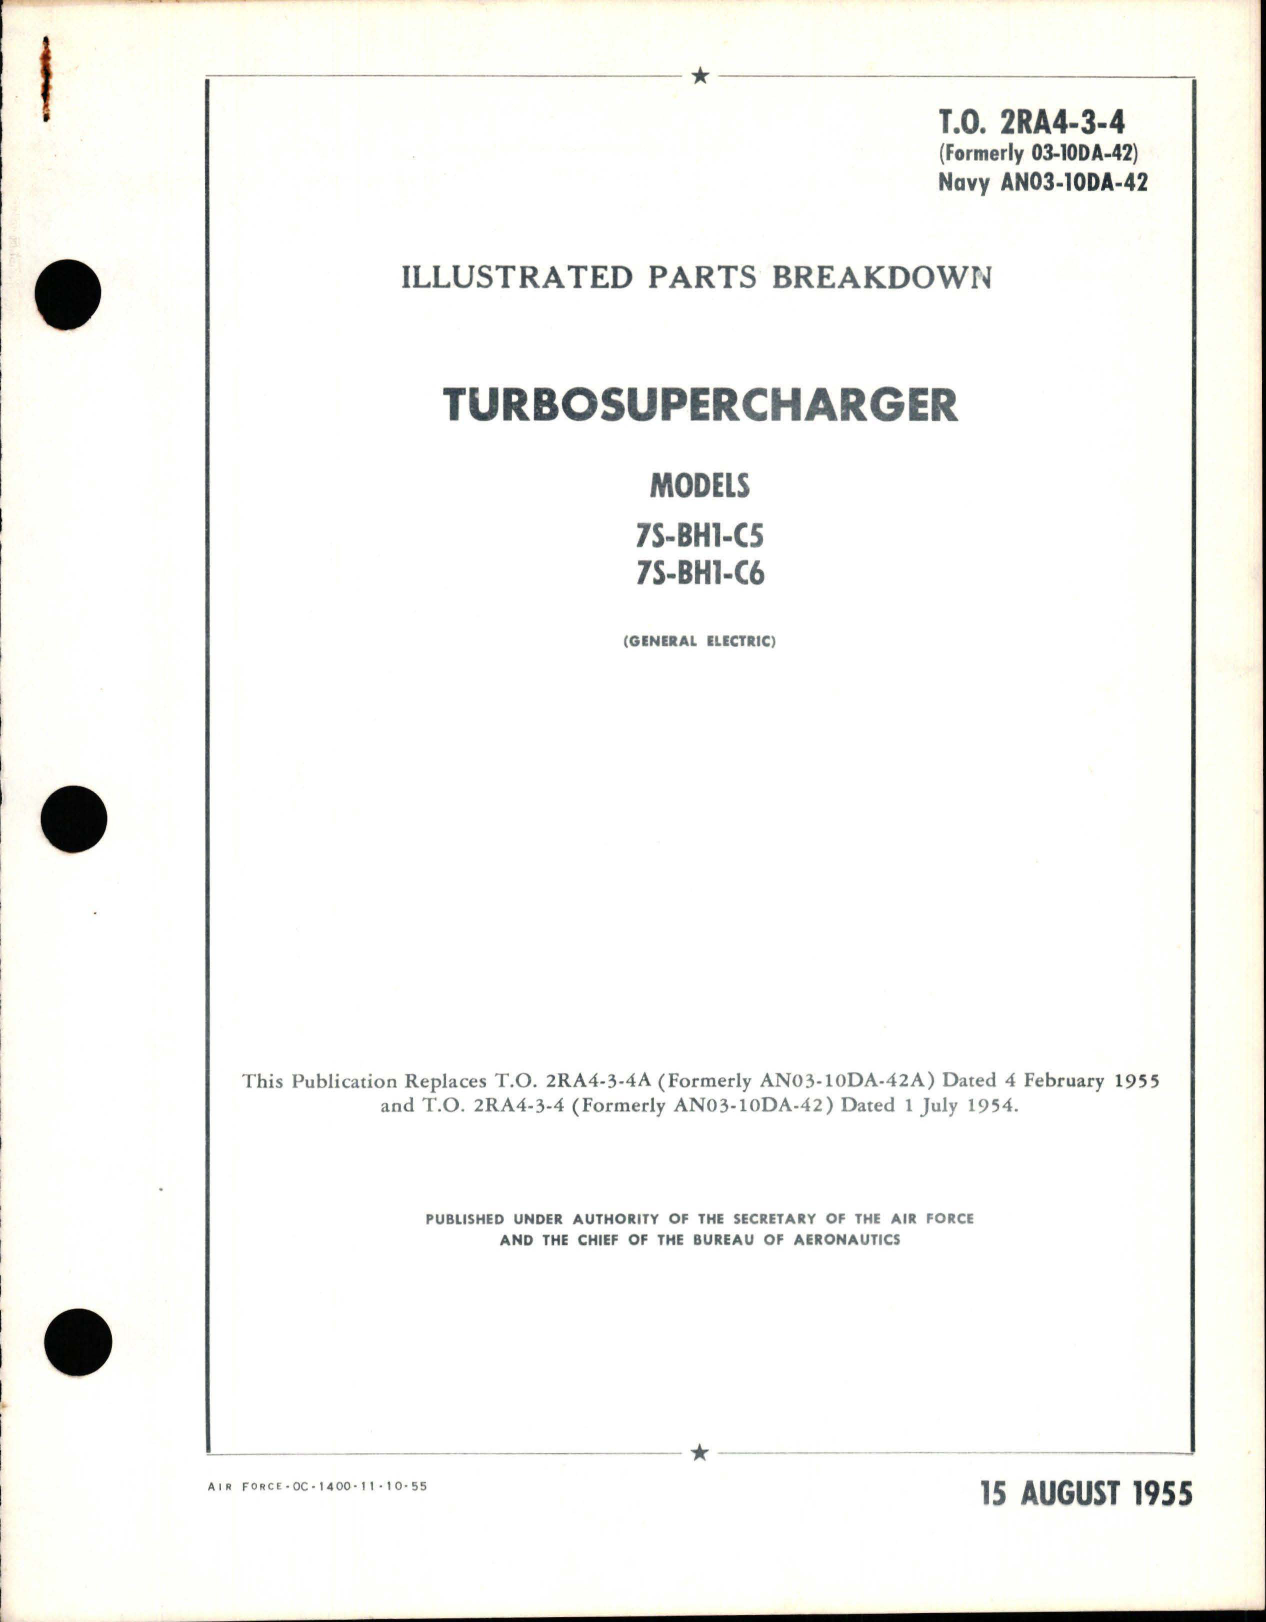 Sample page 1 from AirCorps Library document: Supplement to Illustrated Parts Breakdown for Turbosuperchargers - Models 7S-BH1-C5 and 7S-BH1-C6